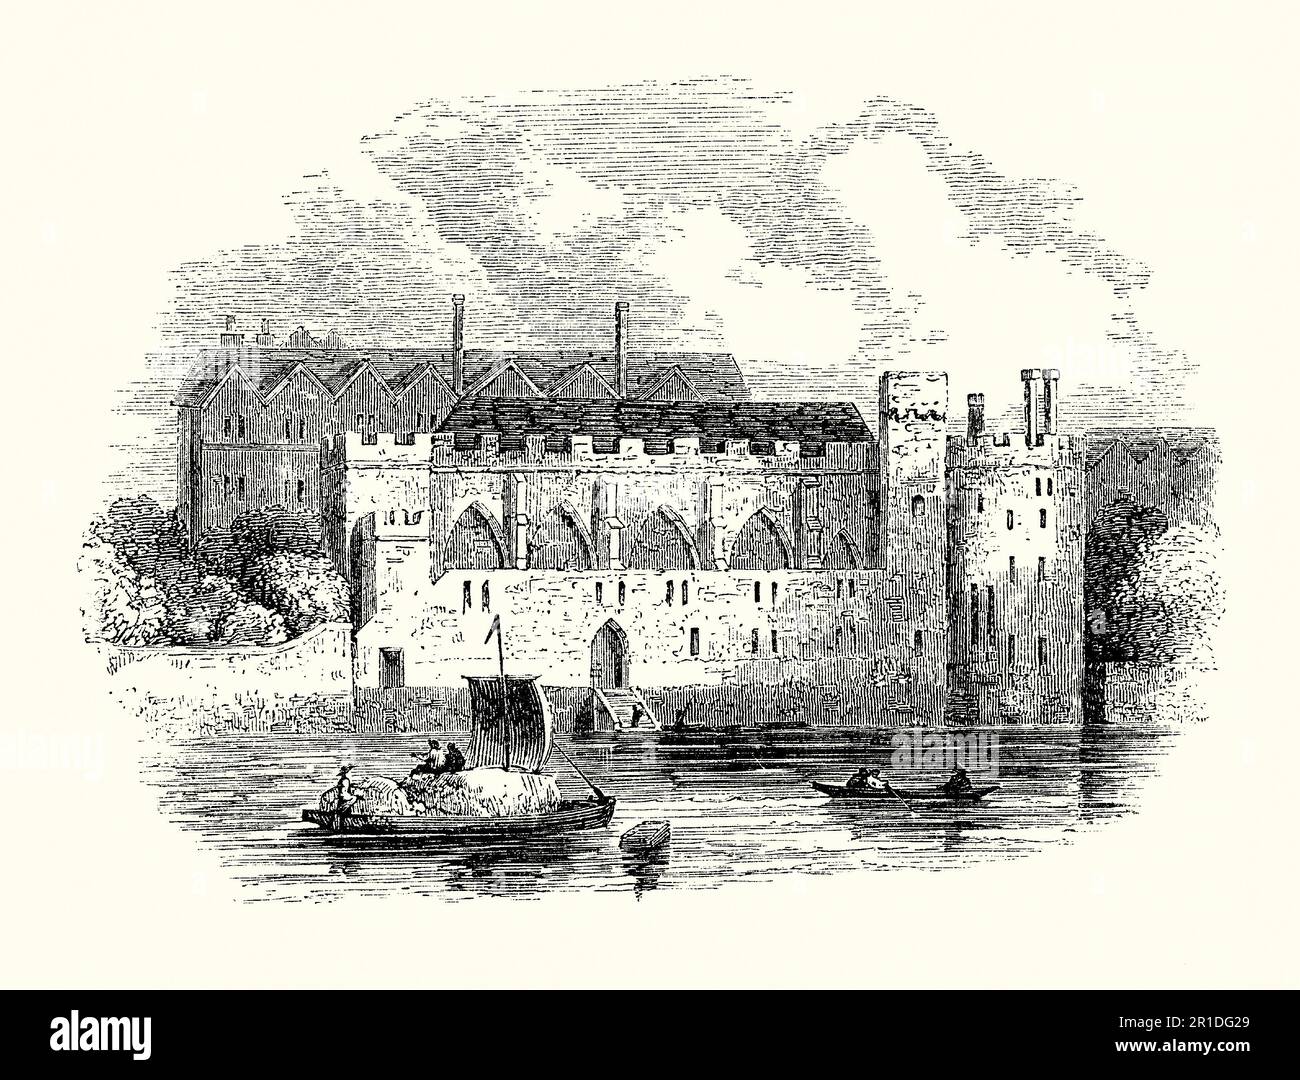 An old engraving from the River Thames showing Durham House (or Durham Inn), Strand, London, England, UK in the 1500s. It was the London town house of the Bishop of Durham and its gardens descended to the River Thames. Anne Boleyn lived in Durham House in 1532 while Henry VIII courted her prior to their marriage in 1533. Henry granted Durham House to his daughter Lady Elizabeth (later queen). Upon her accession, Elizabeth kept possession of the residence until 1583, when she granted it to Sir Walter Raleigh. Stock Photo